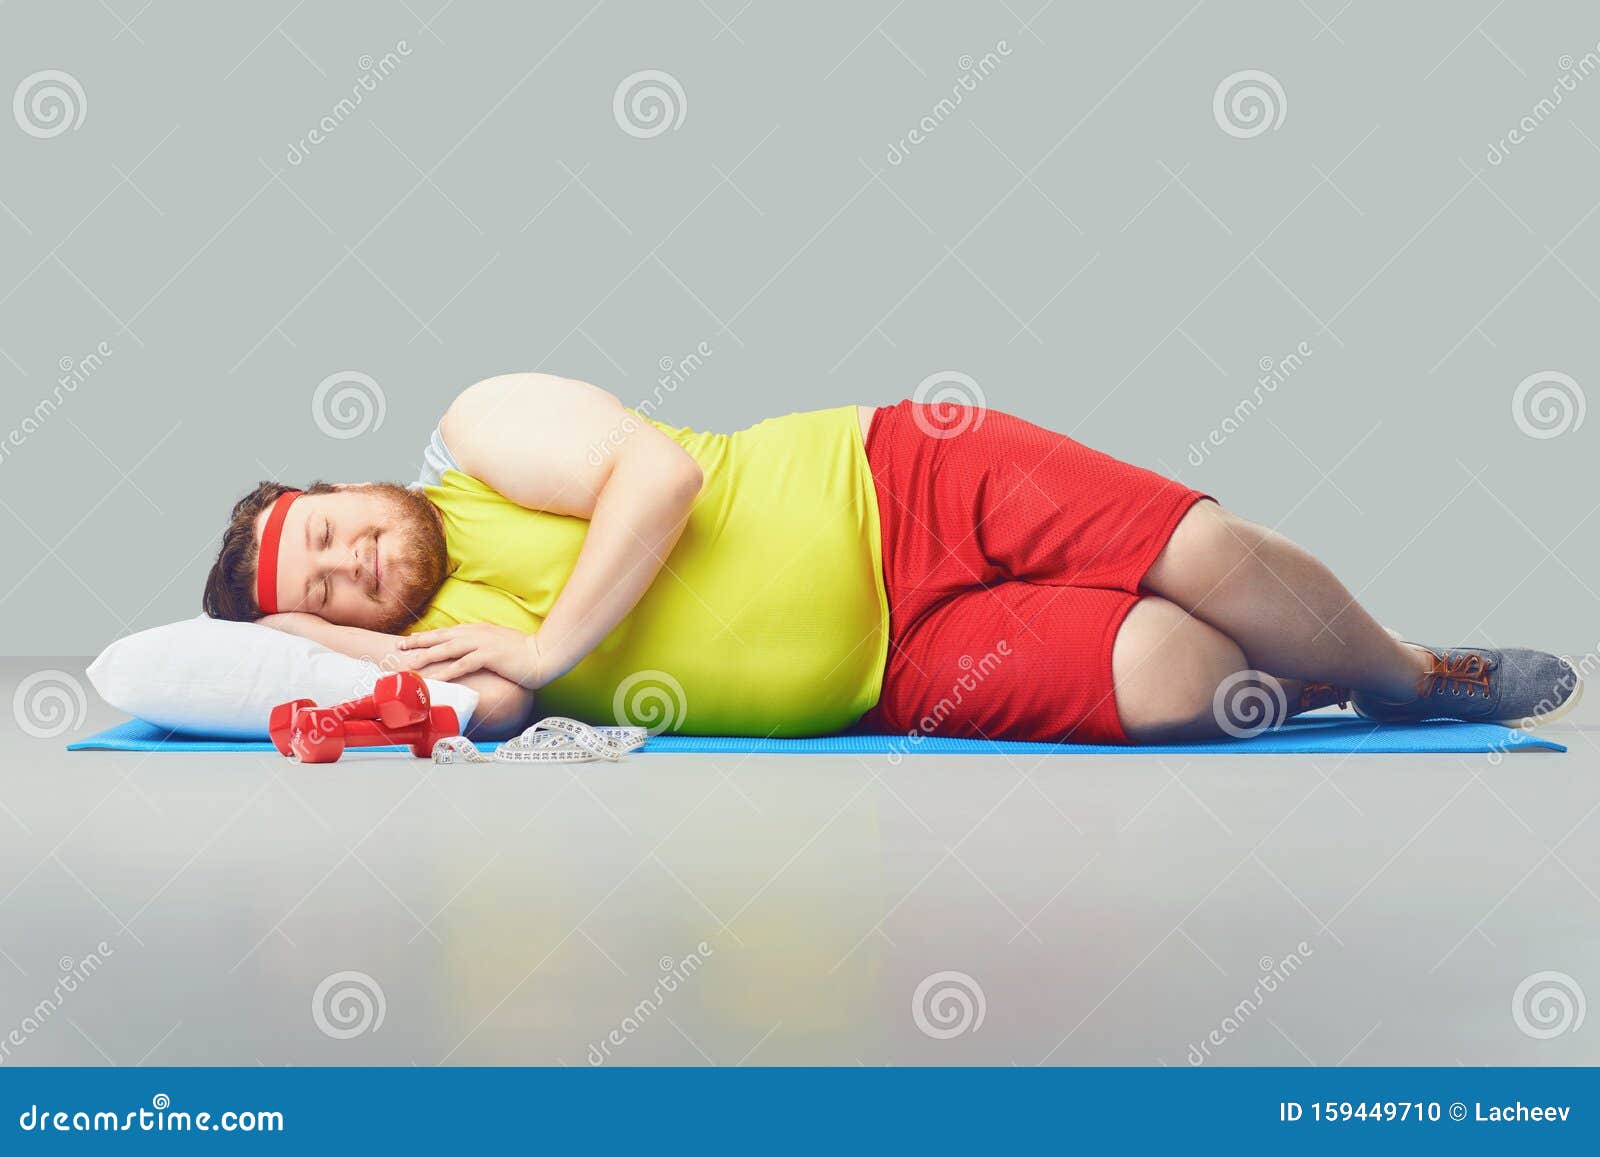 Lazy Fat Funny Man is Sleeping on a Gray Background. Stock Photo - Image of  lying, exercise: 159449710